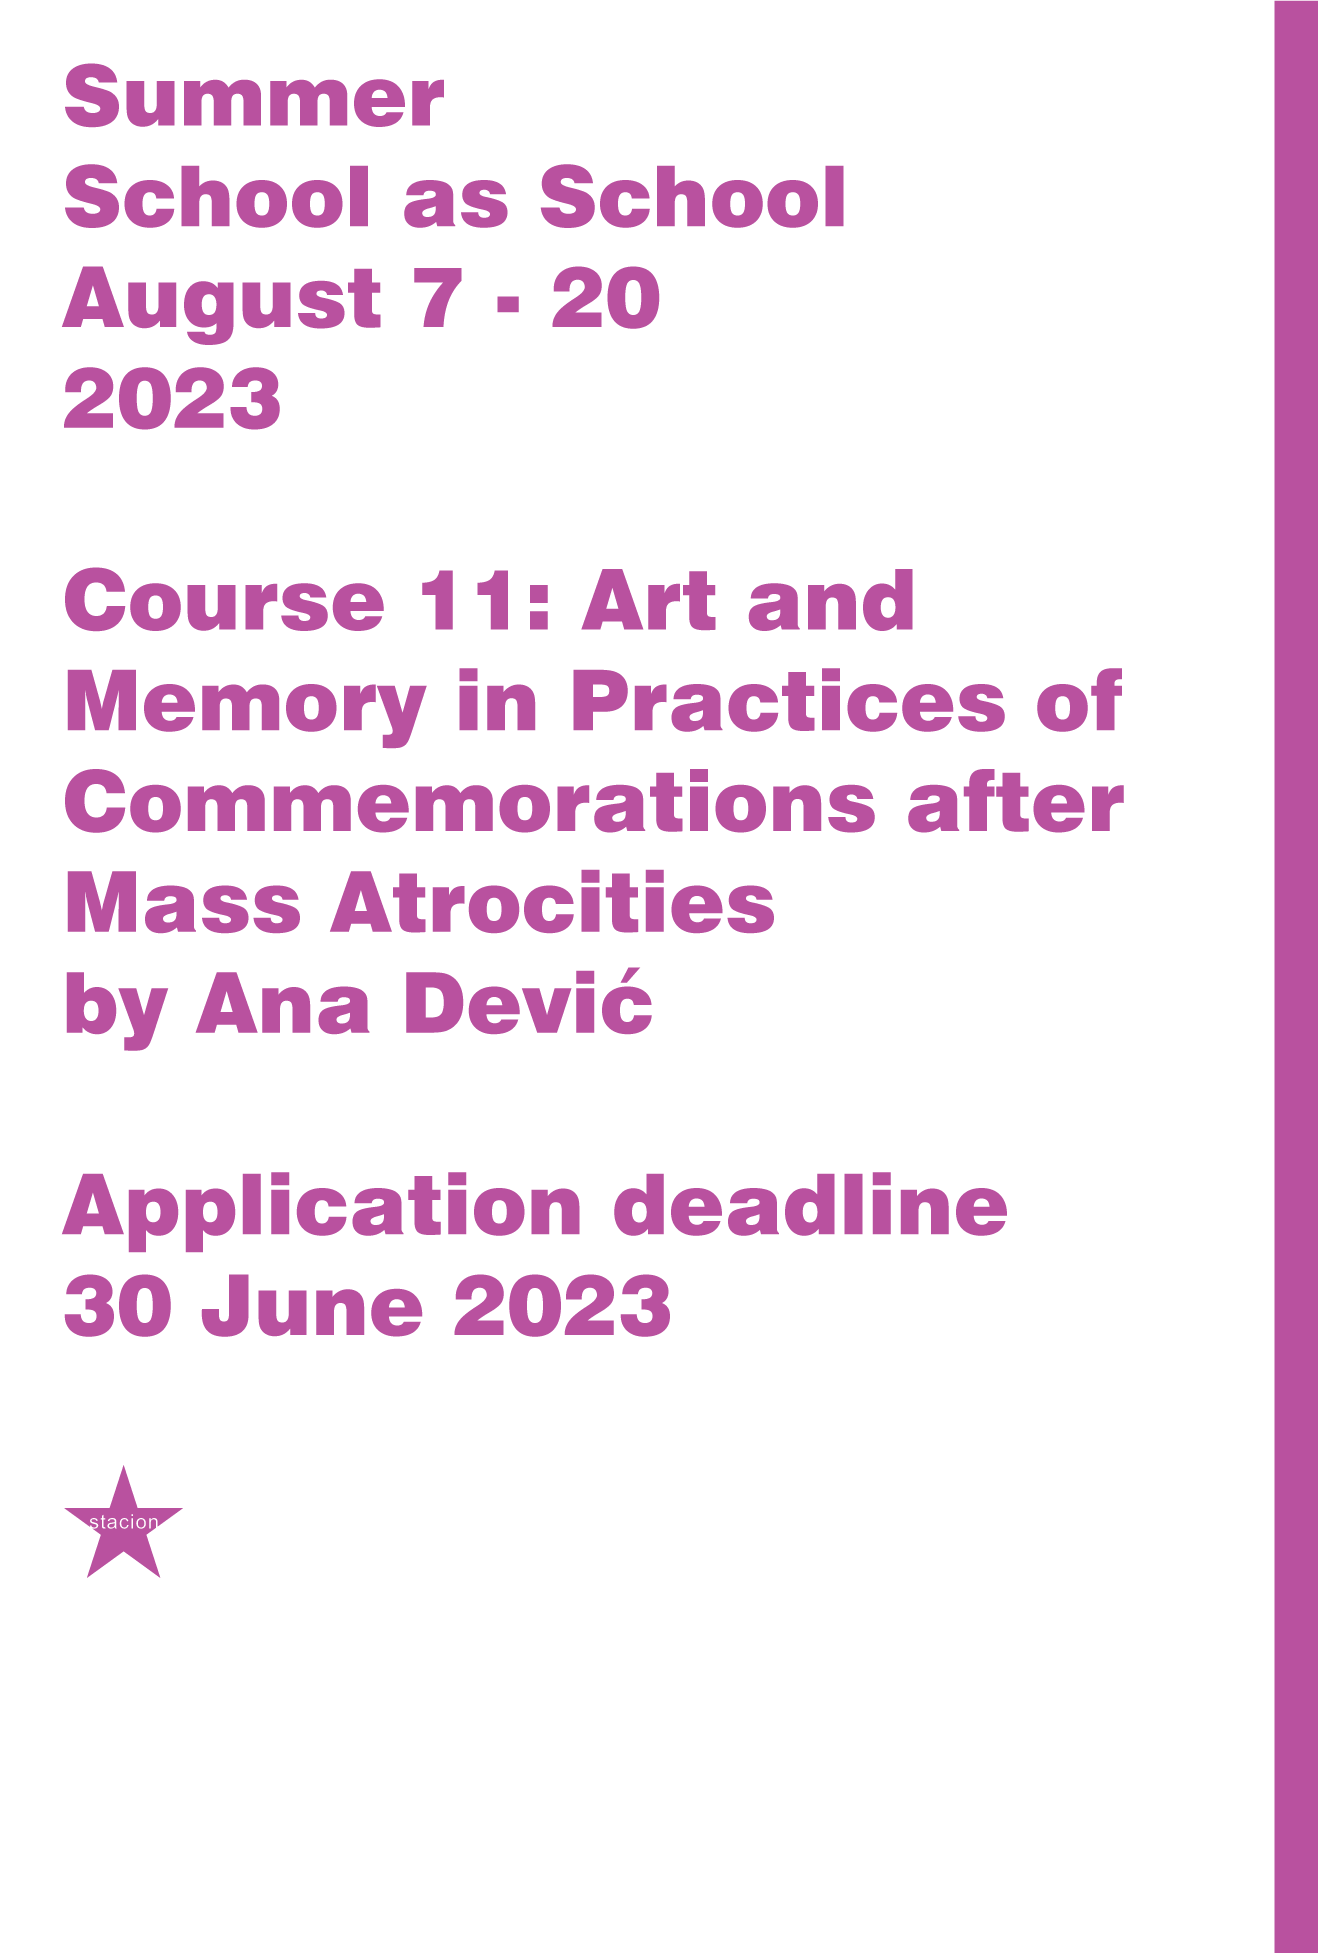 Course 11: Art and Memory in Practices of Commemorations after Mass Atrocities